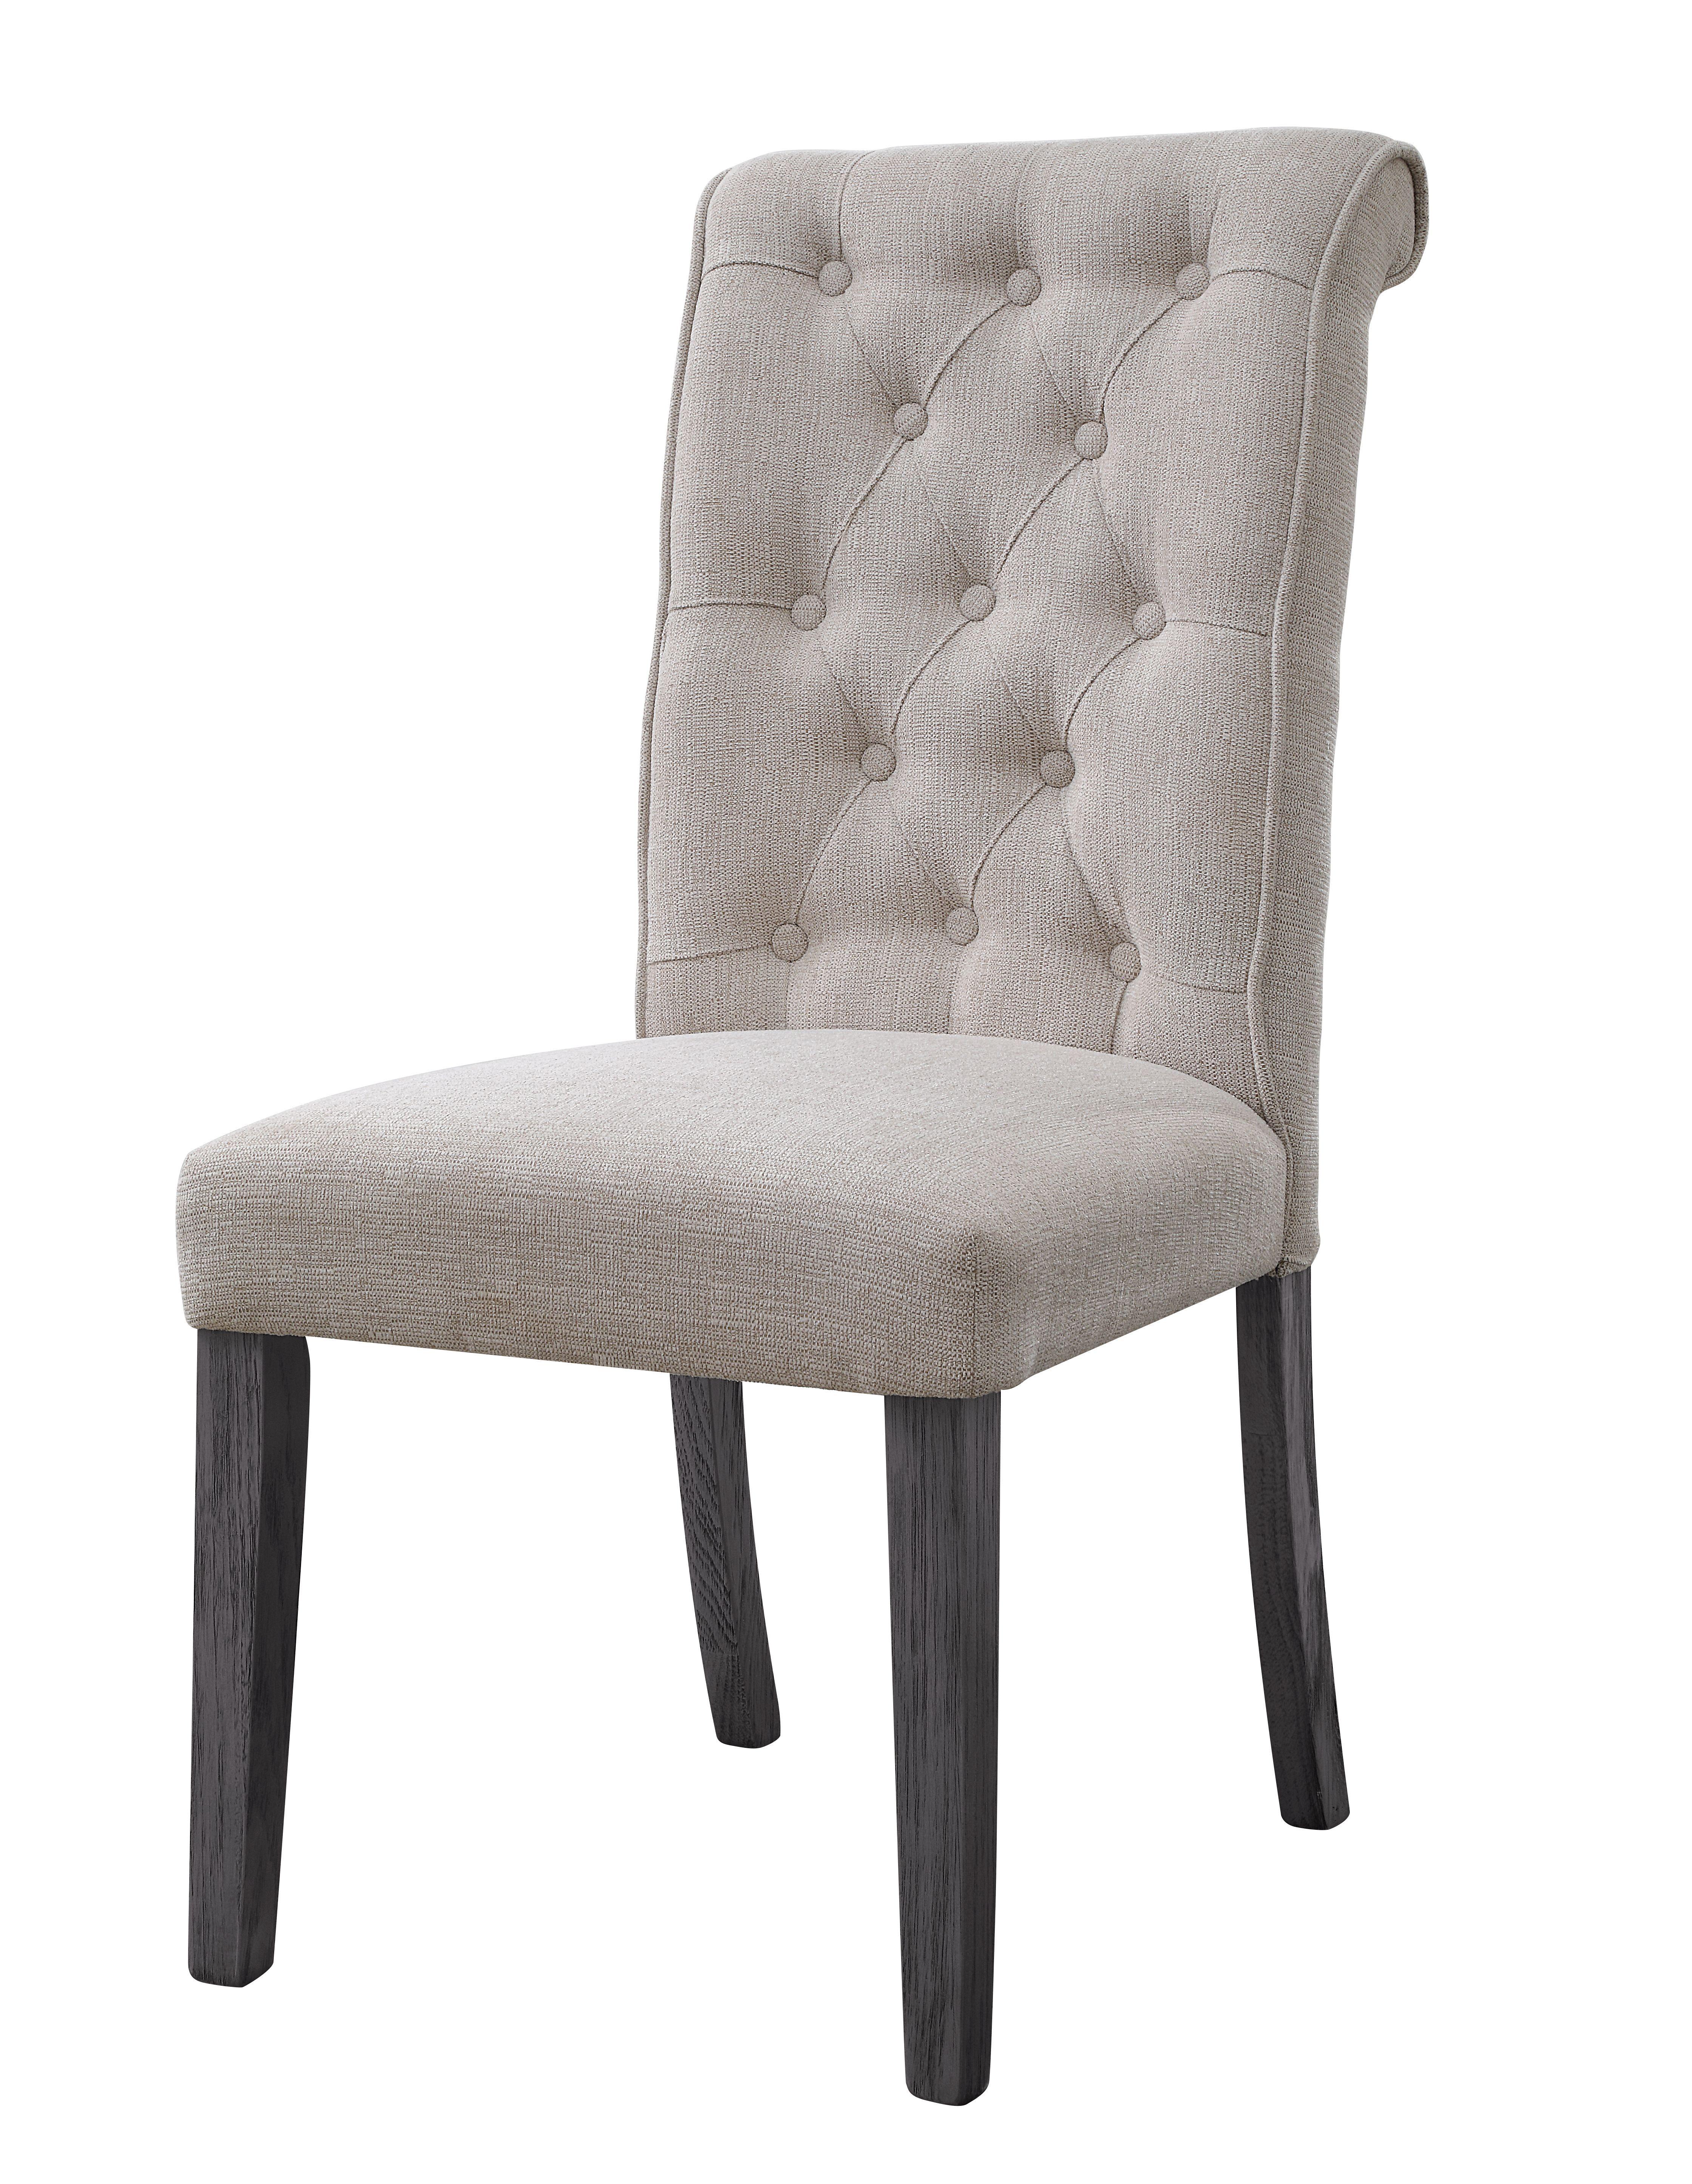 Modern Dining Chair Yabeina 73267-2pcs in Gray Linen